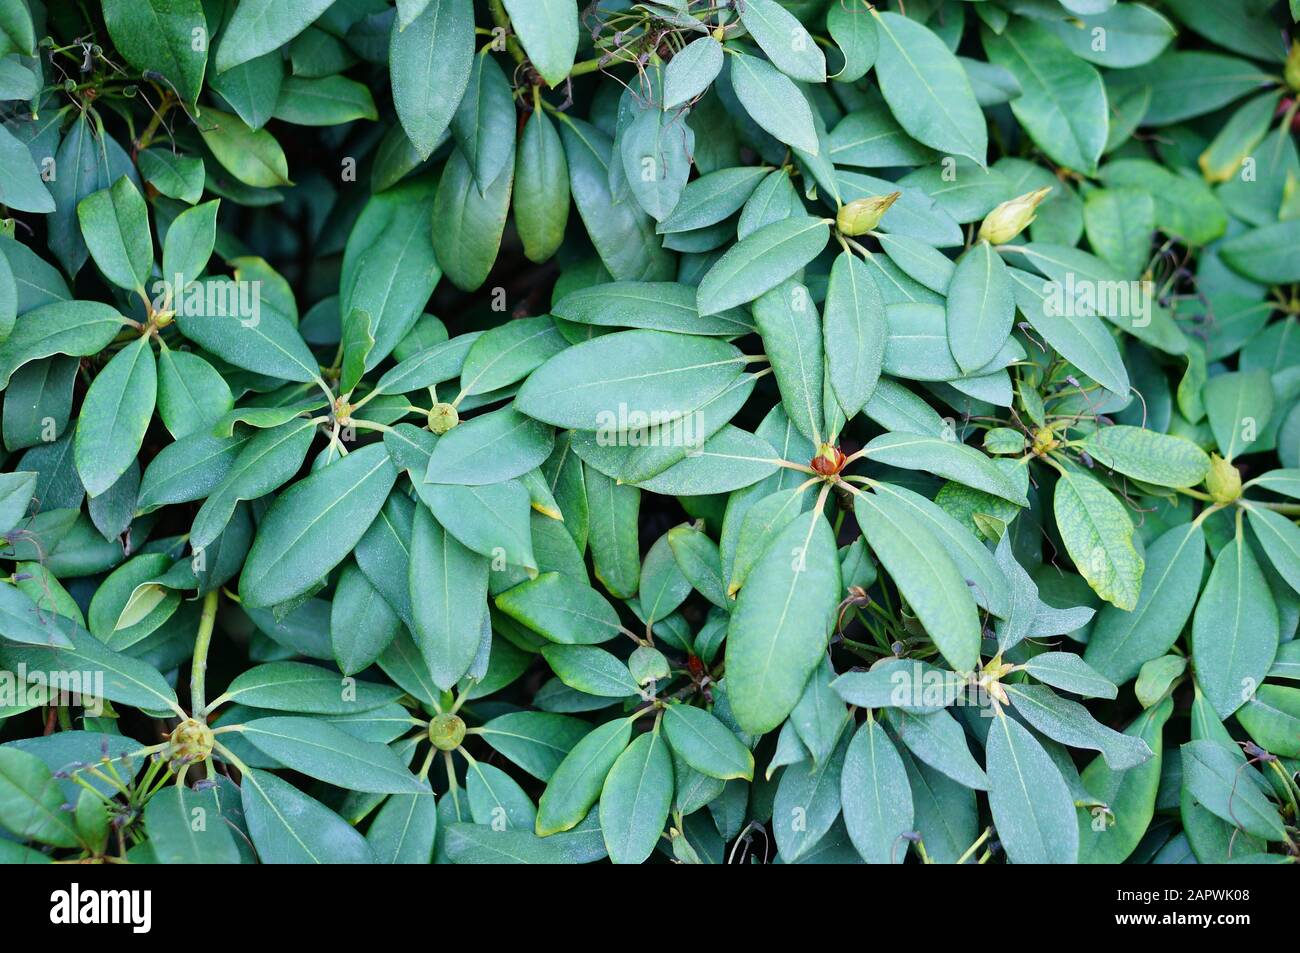 Closeup shot of the leaves of a Manilkara plant for a background Stock Photo